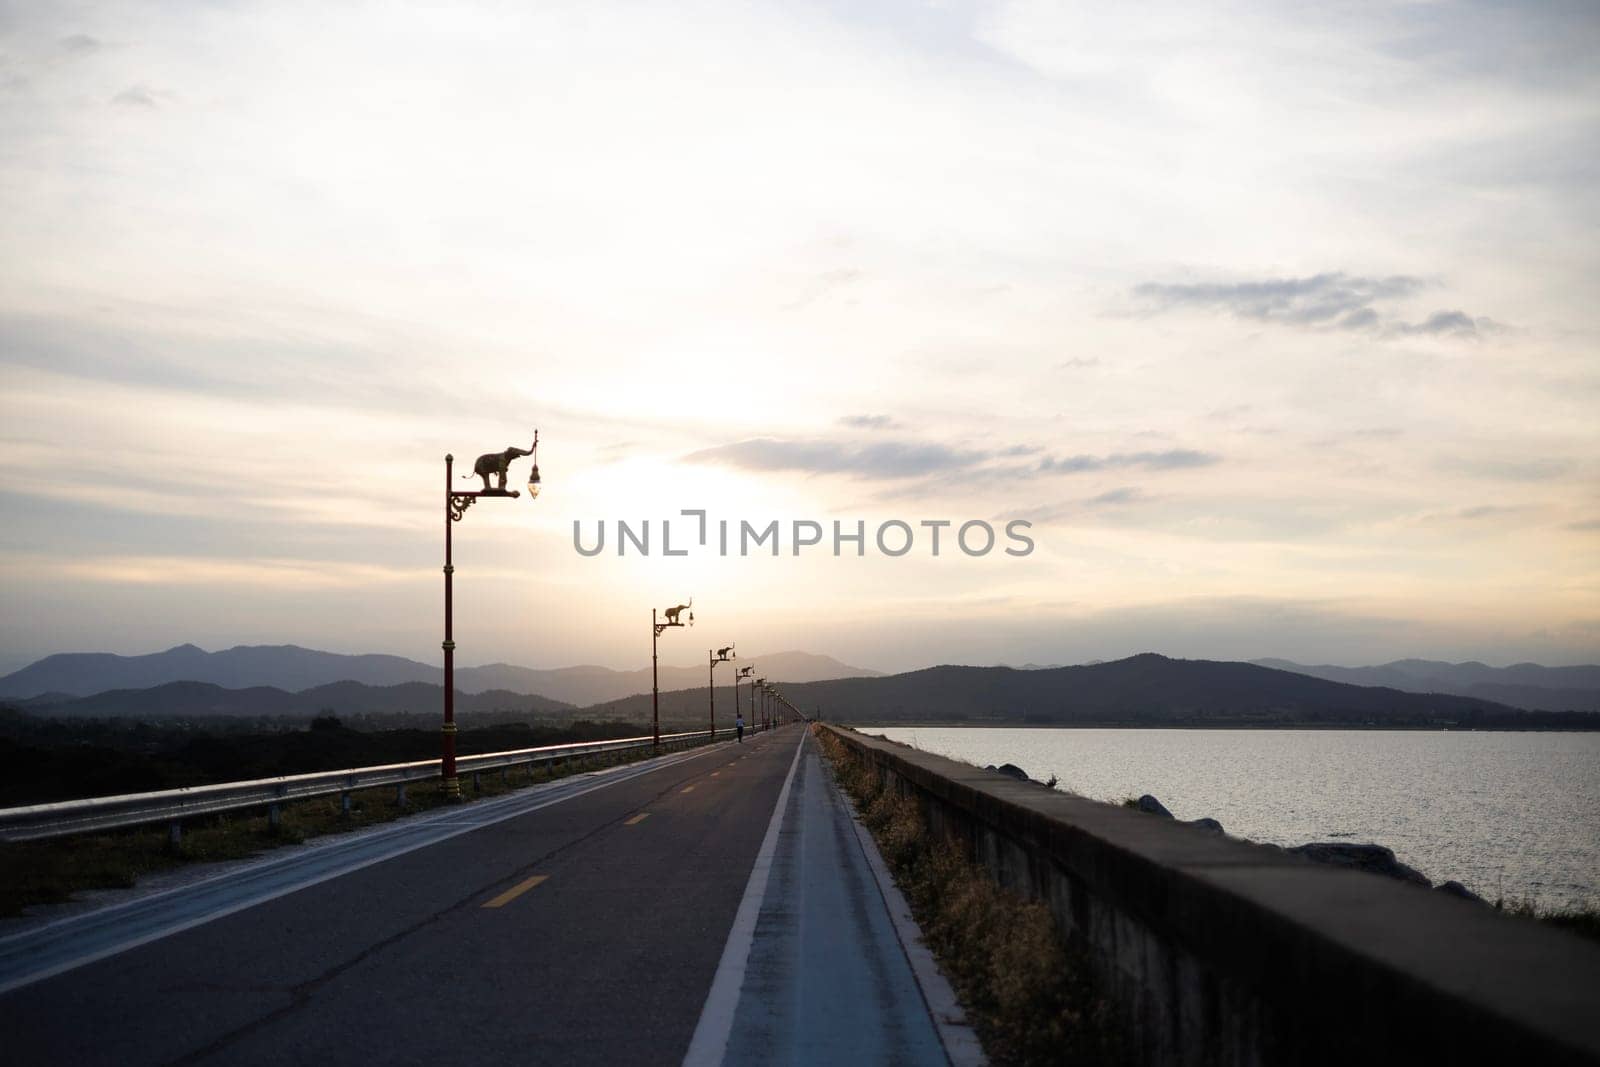 Empty Asphalt Road And Mountain Scenery At Sunset. Asphalt road and mountain with sky clouds at sunset.